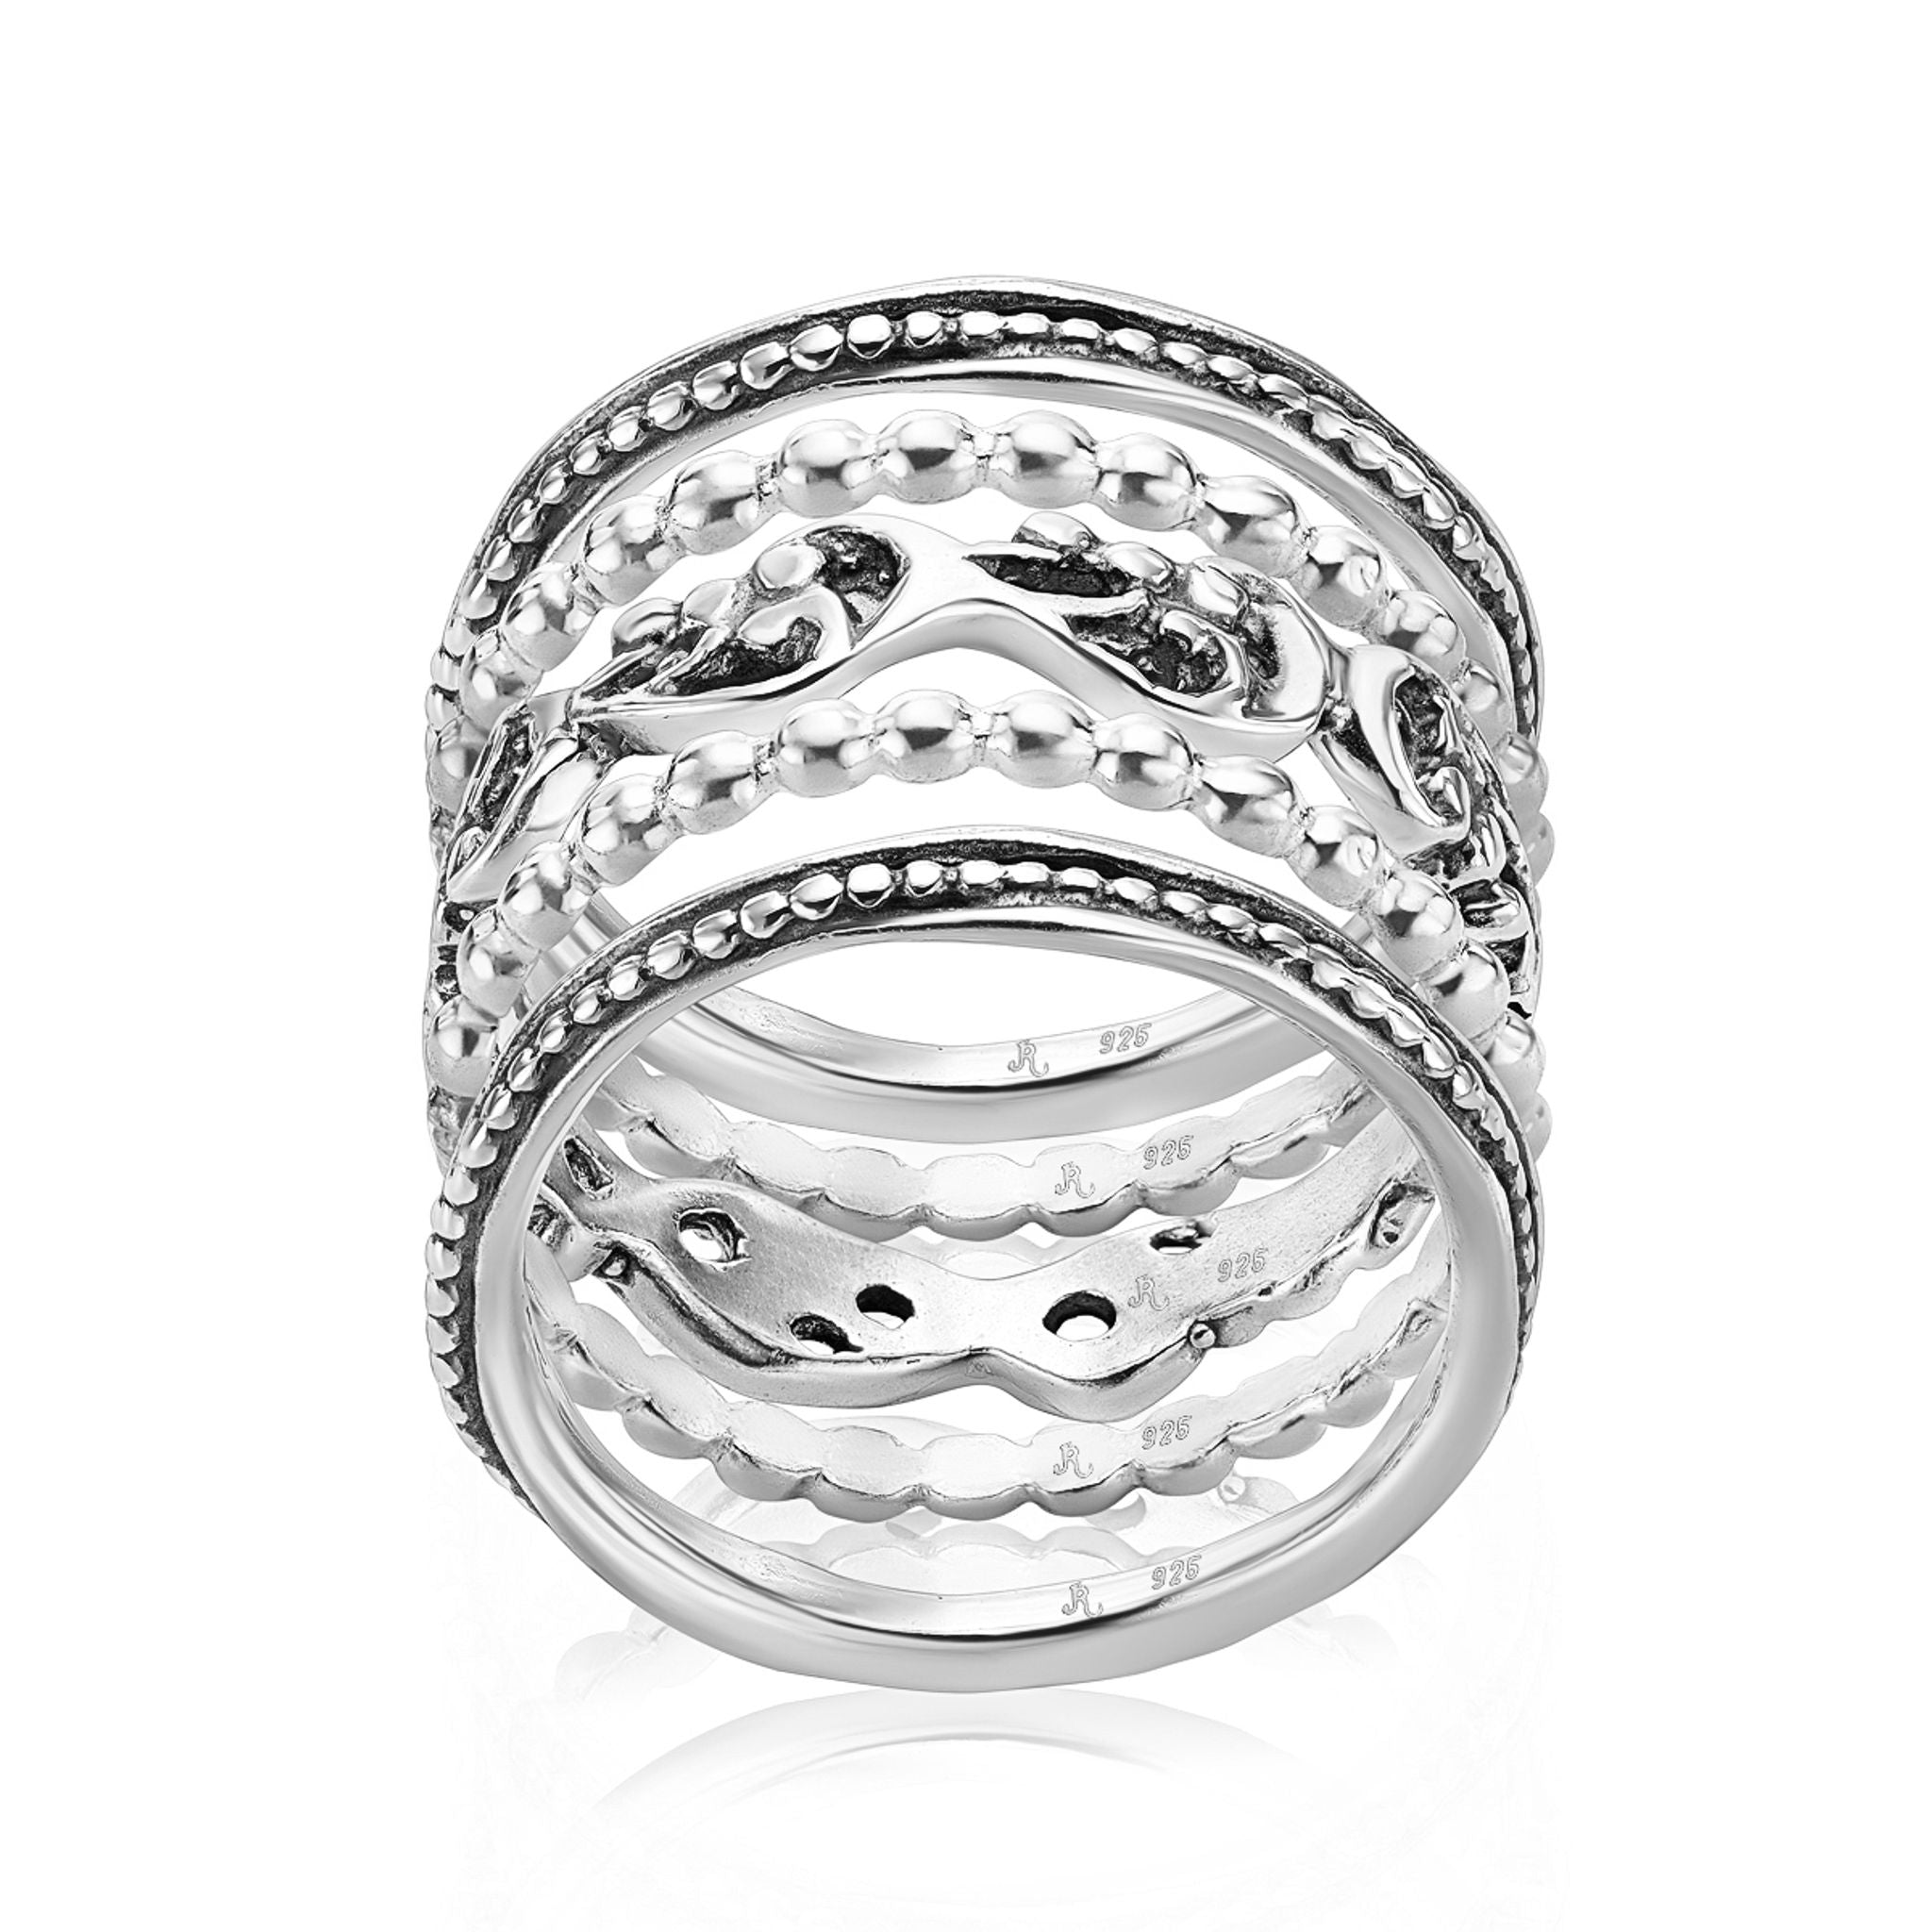 Buy quality 925 STERLING SILVER FANCY BAND FOR LADIES in Ahmedabad